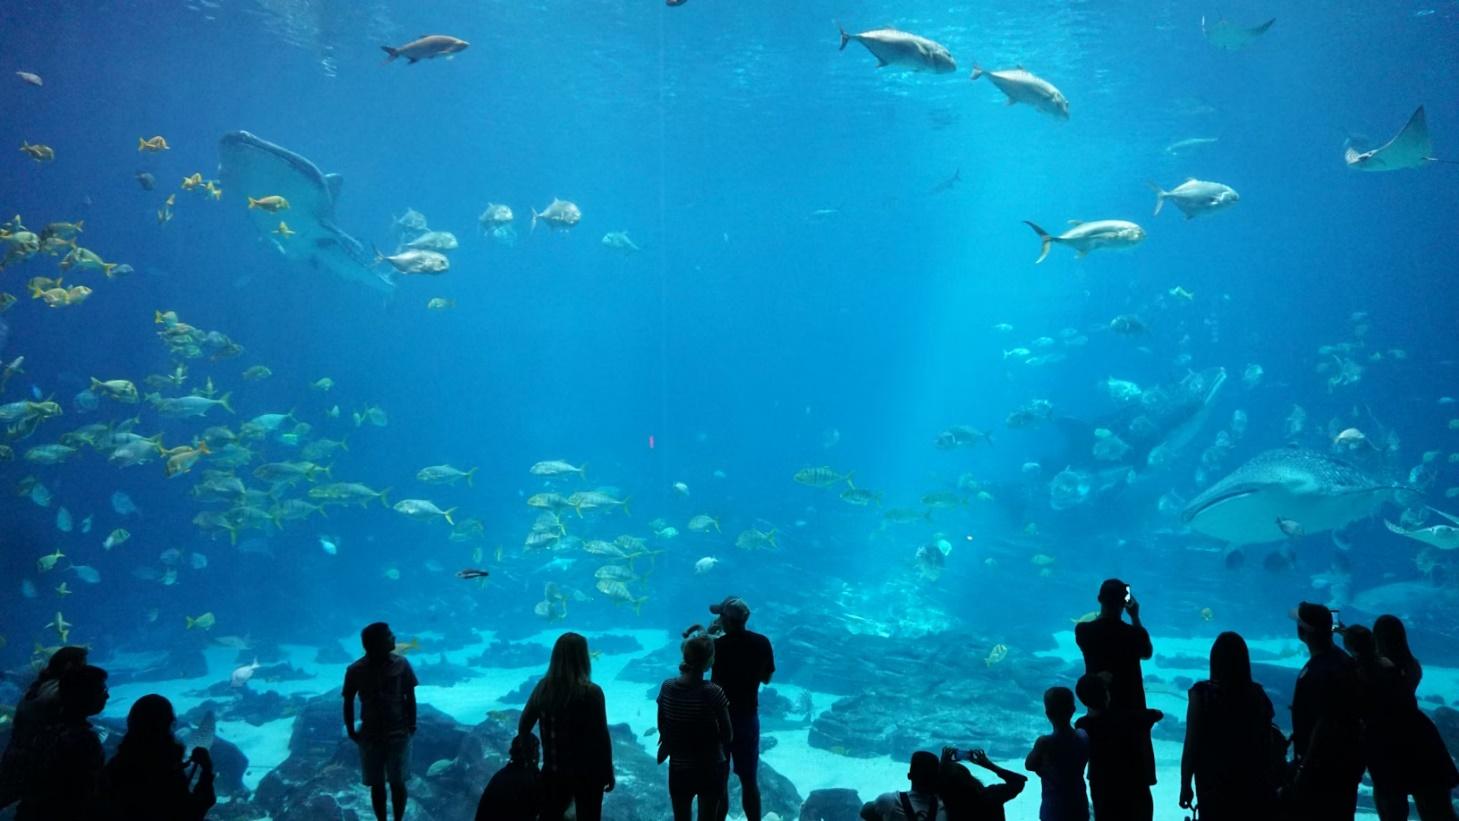 The picture shows an aquarium in Atlanta, a fun thing to do in Atlanta with kids.